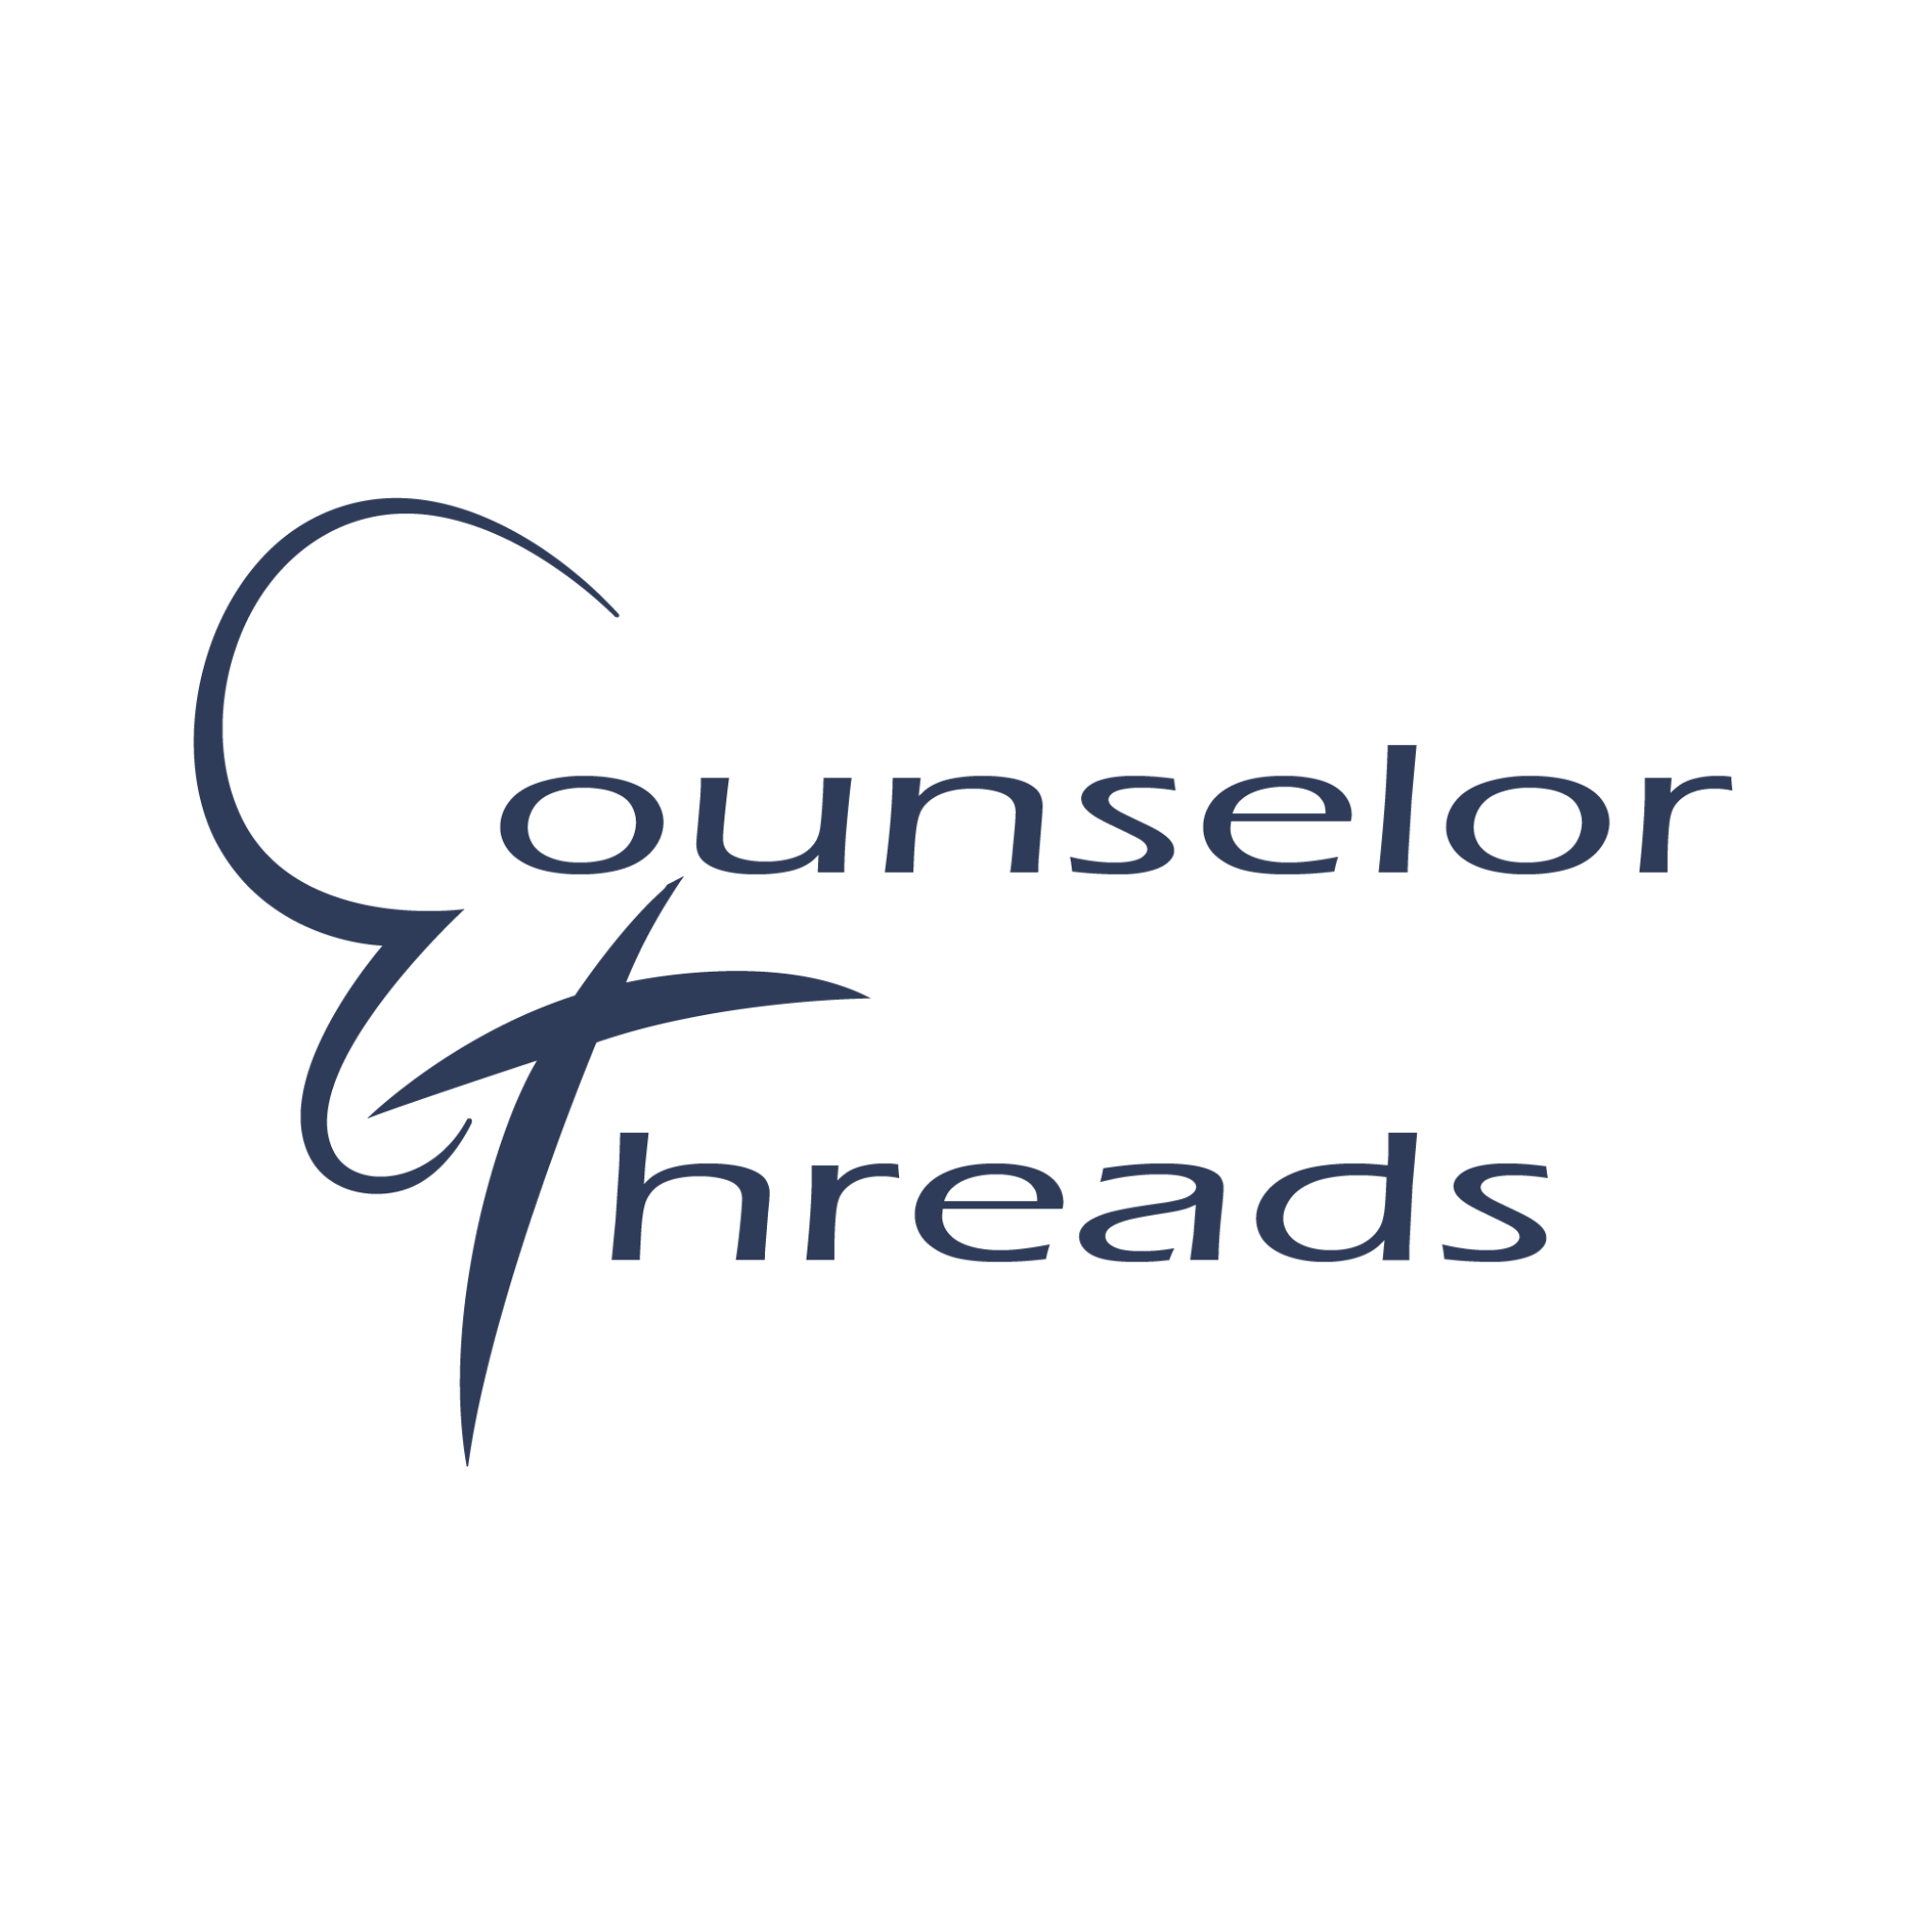 Counselor Threads